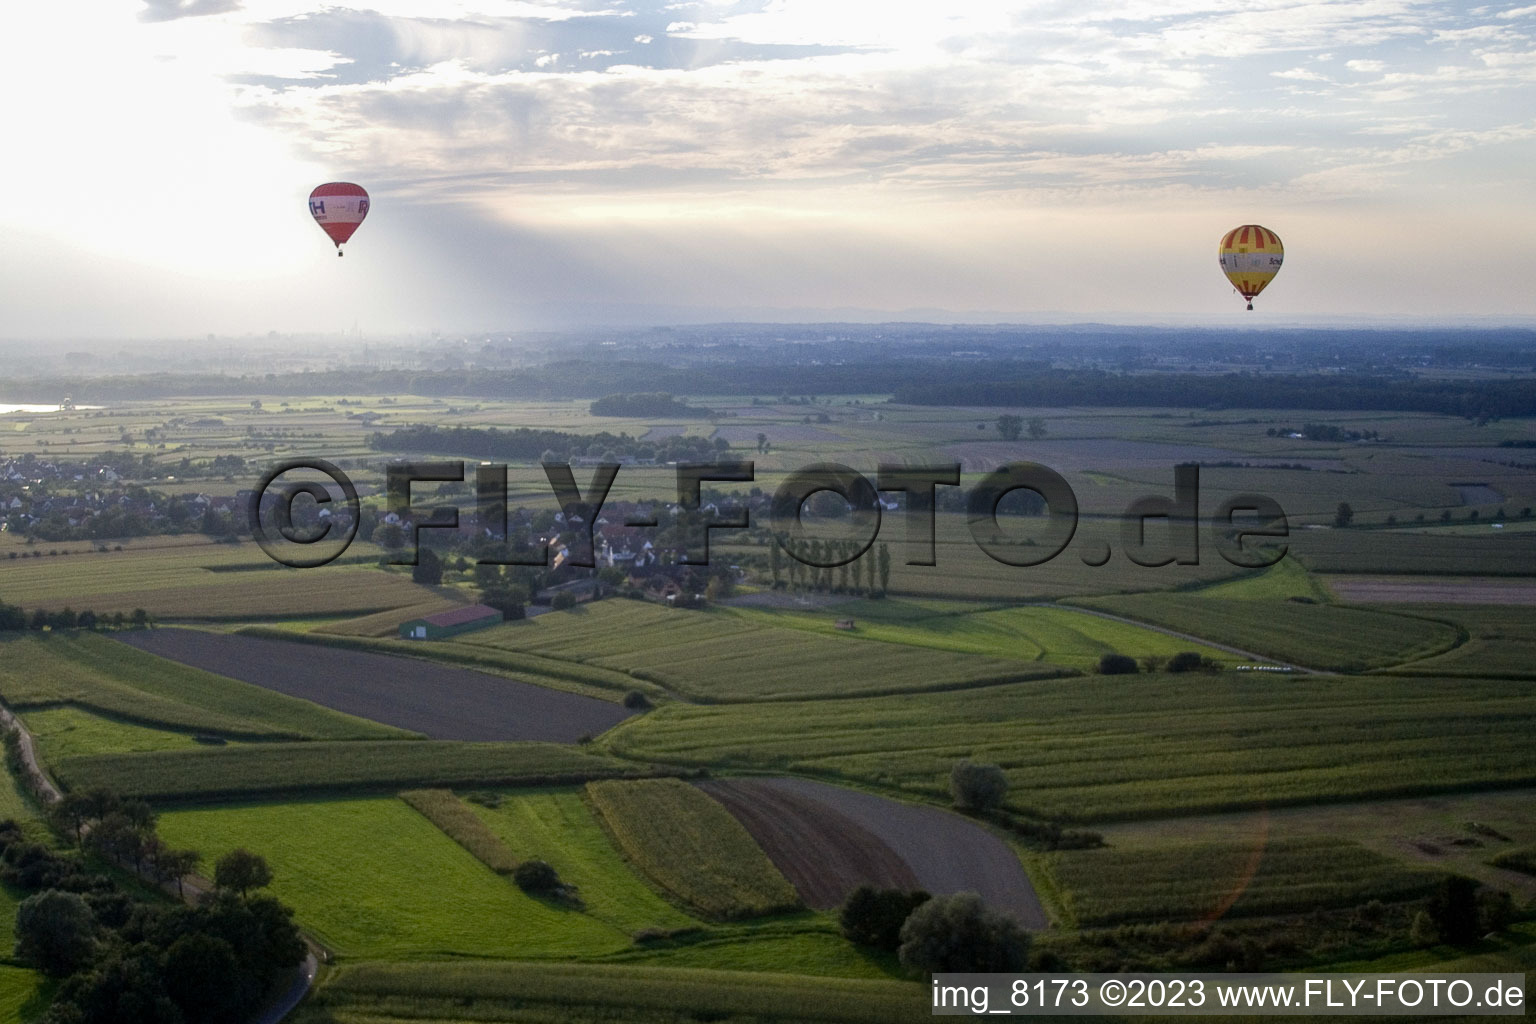 Aerial photograpy of Balloon launch at Legelshurst in Legelshurst in the state Baden-Wuerttemberg, Germany